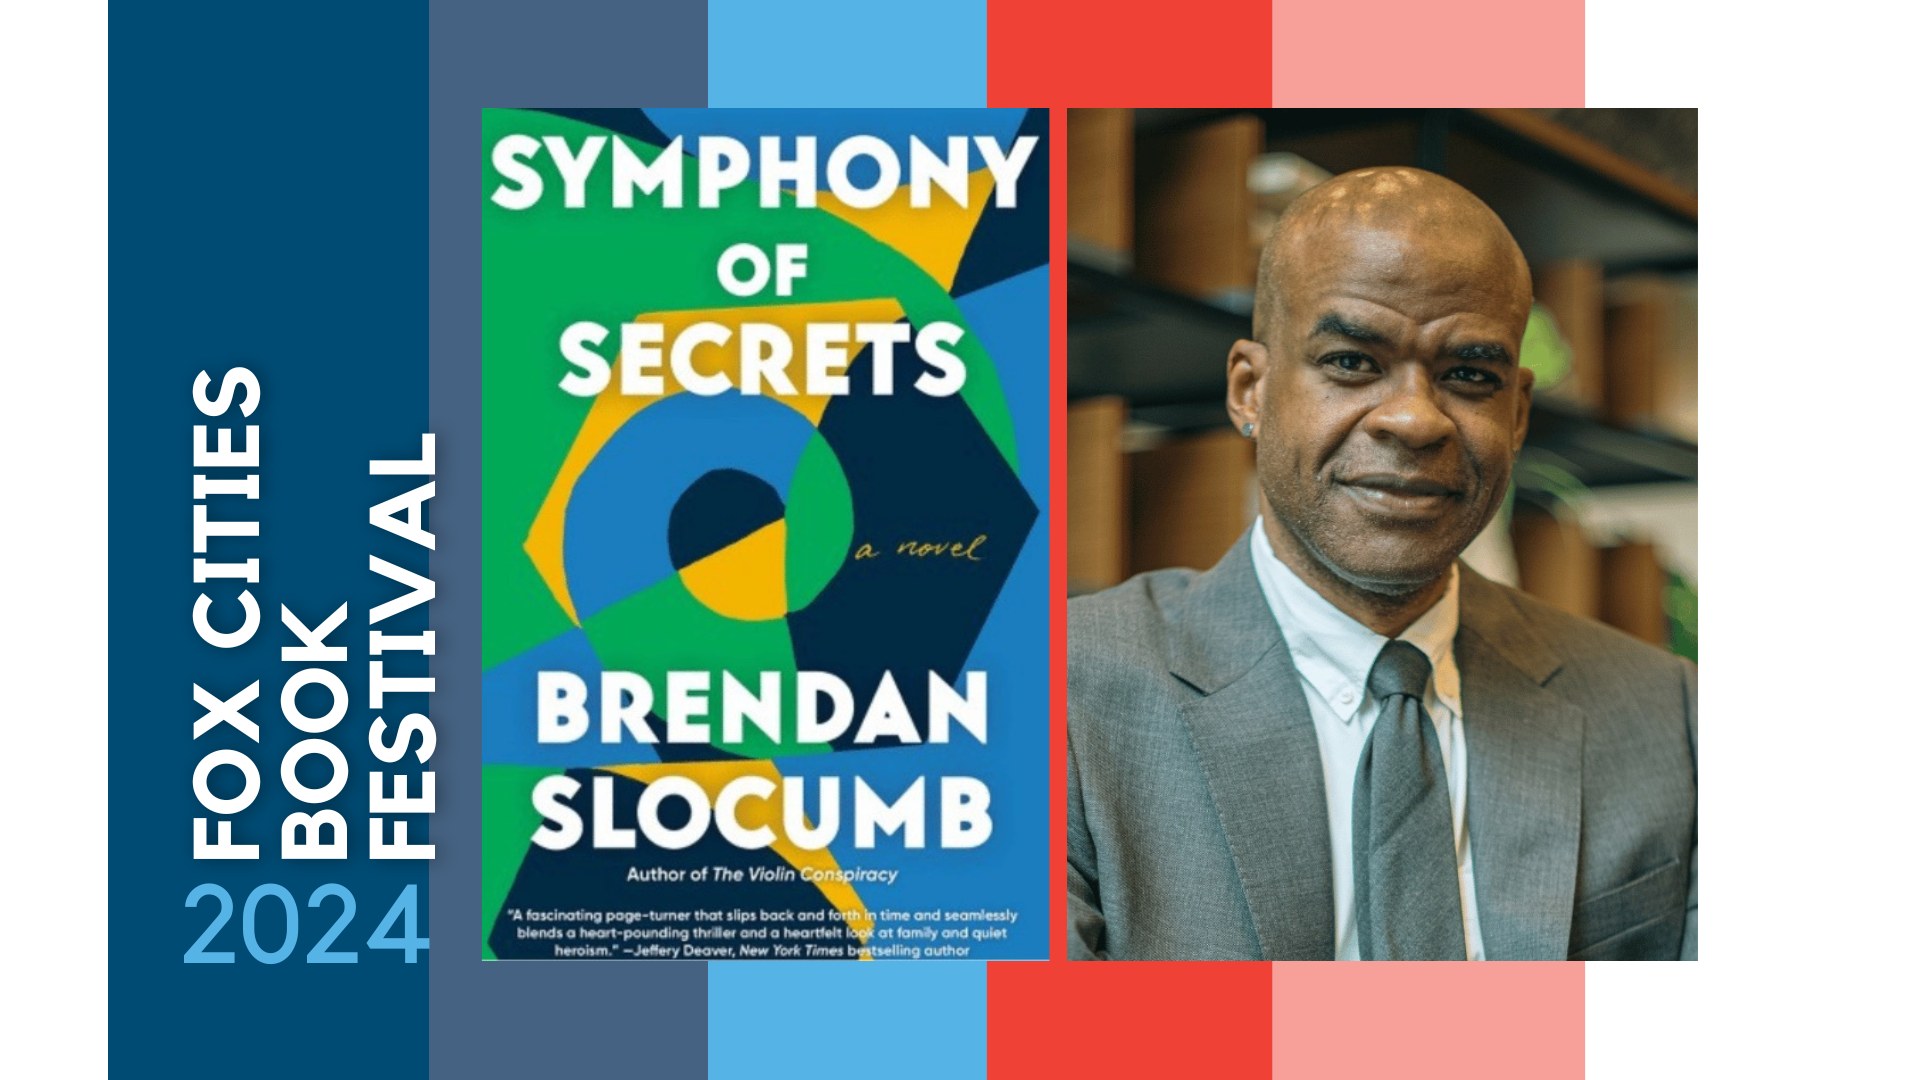 2024 FCBF a free author event with Brendan Slocumb on April 6 at 2:00 pm. Gibson Community Hall in Appleton, WI.